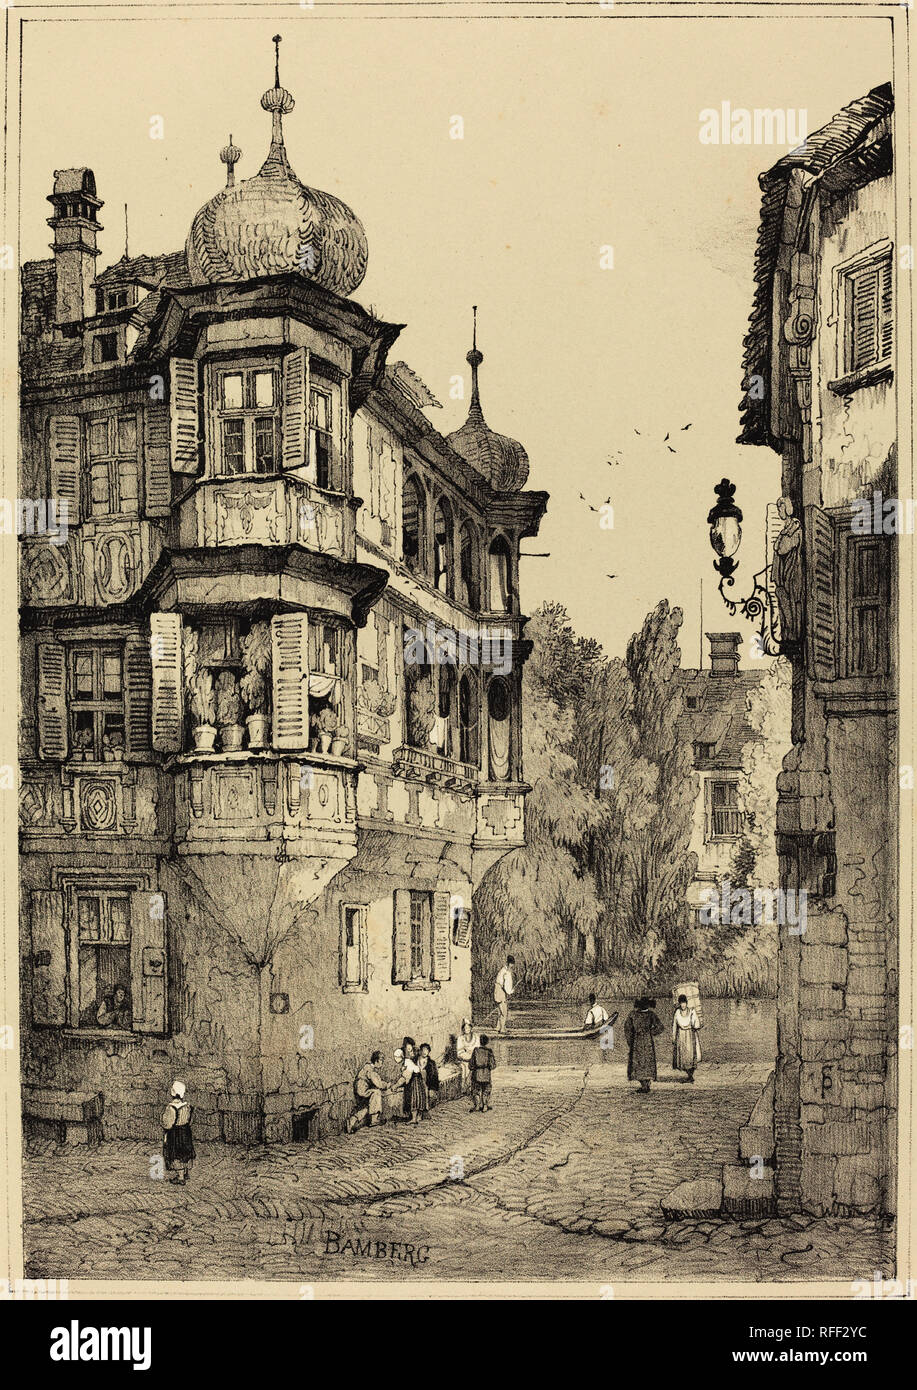 Bamberg. Dimensions: image: 41.1 x 28.7 cm (16 3/16 x 11 5/16 in.)  sheet: 54.5 x 36.9 cm (21 7/16 x 14 1/2 in.). Medium: lithograph touched with white gouache on wove paper. Museum: National Gallery of Art, Washington DC. Author: Samuel Prout. Stock Photo